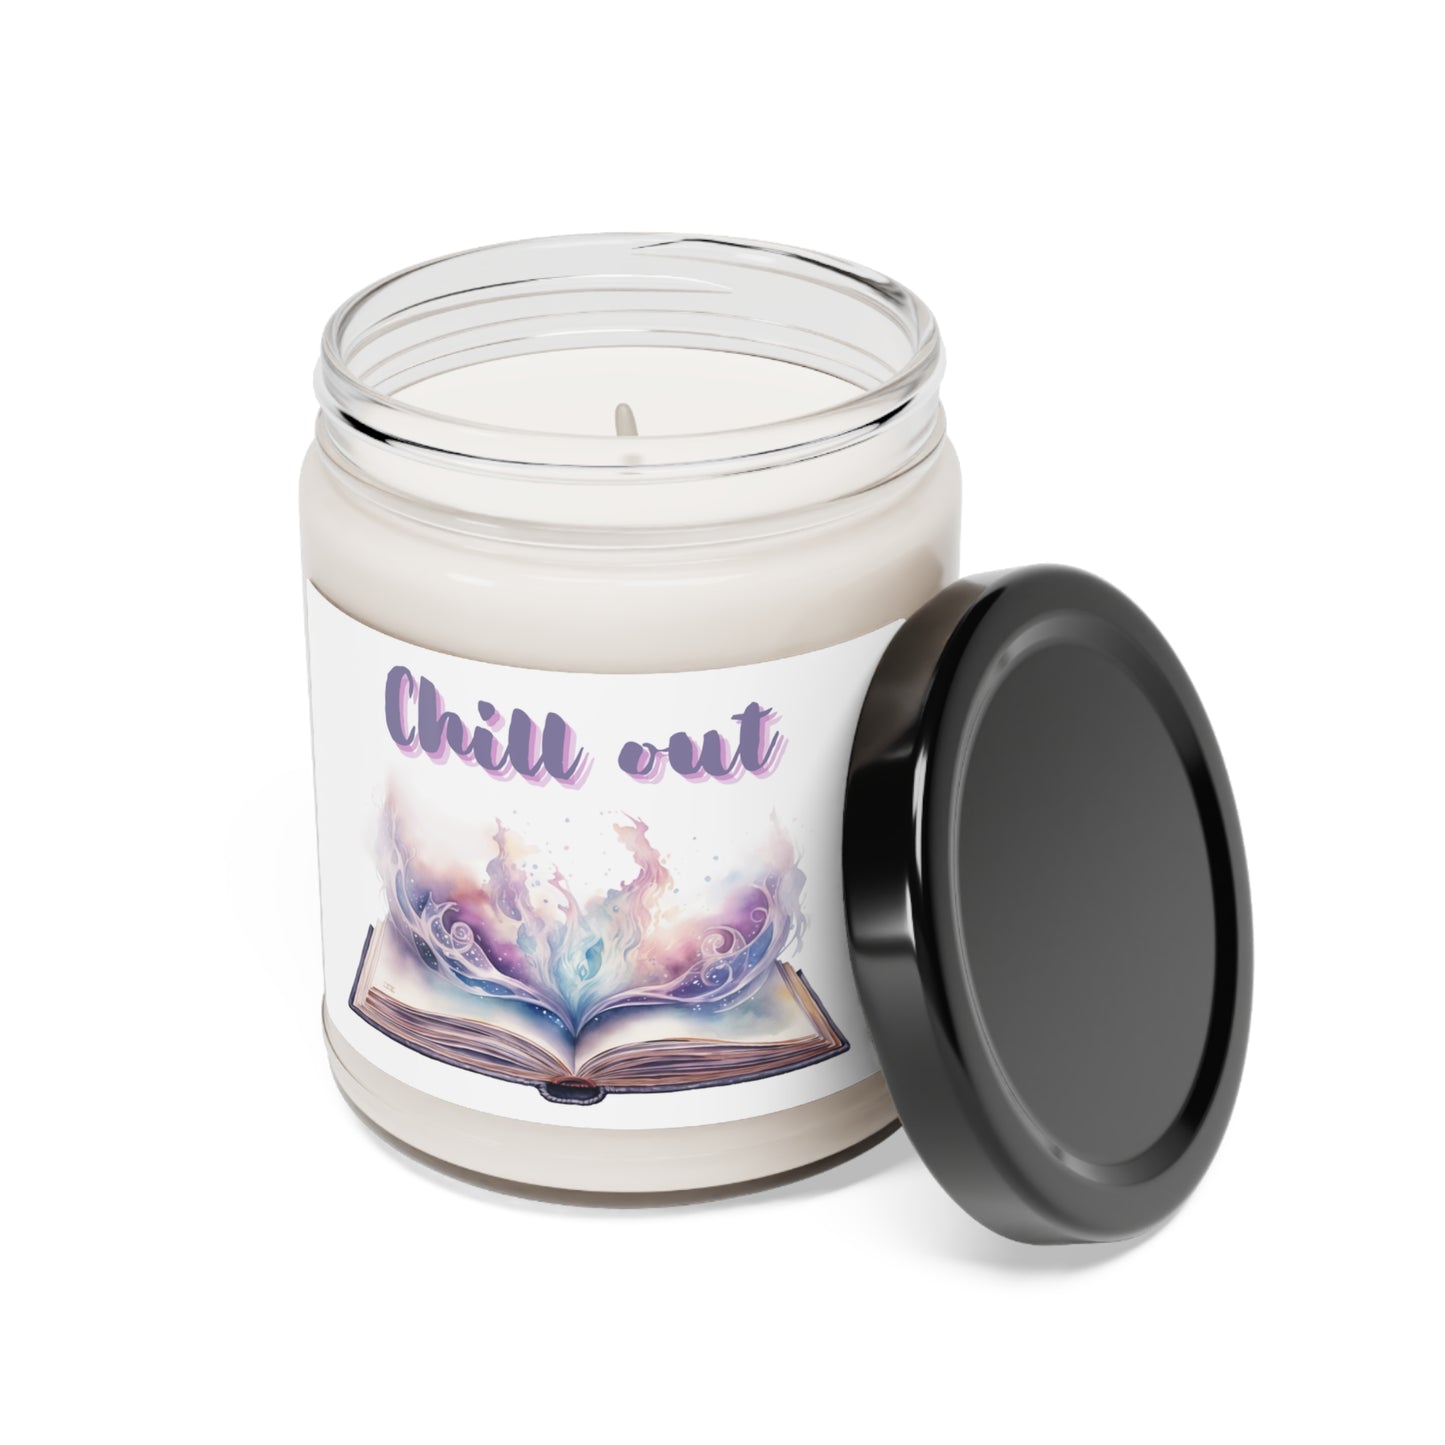 Chill Out, Scented Soy Candle, 9oz